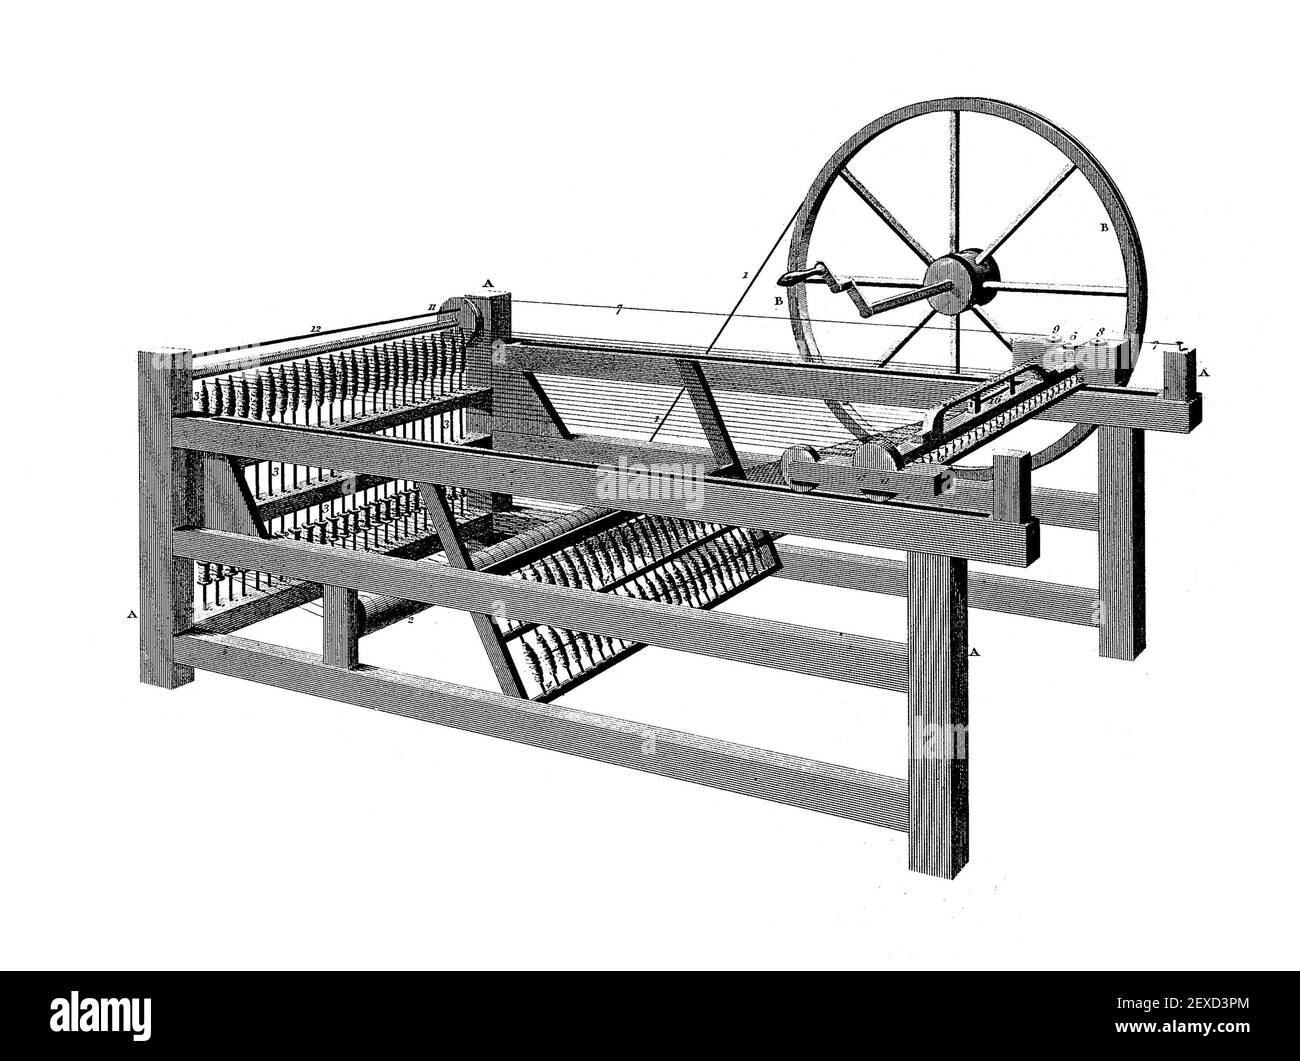 Spinning Jenny, engraving, 1811. The spinning jenny was a multi-spindle spinning frame, invented in 1764 or 1765 by James Hargreaves in Lancashire, England. Stock Photo